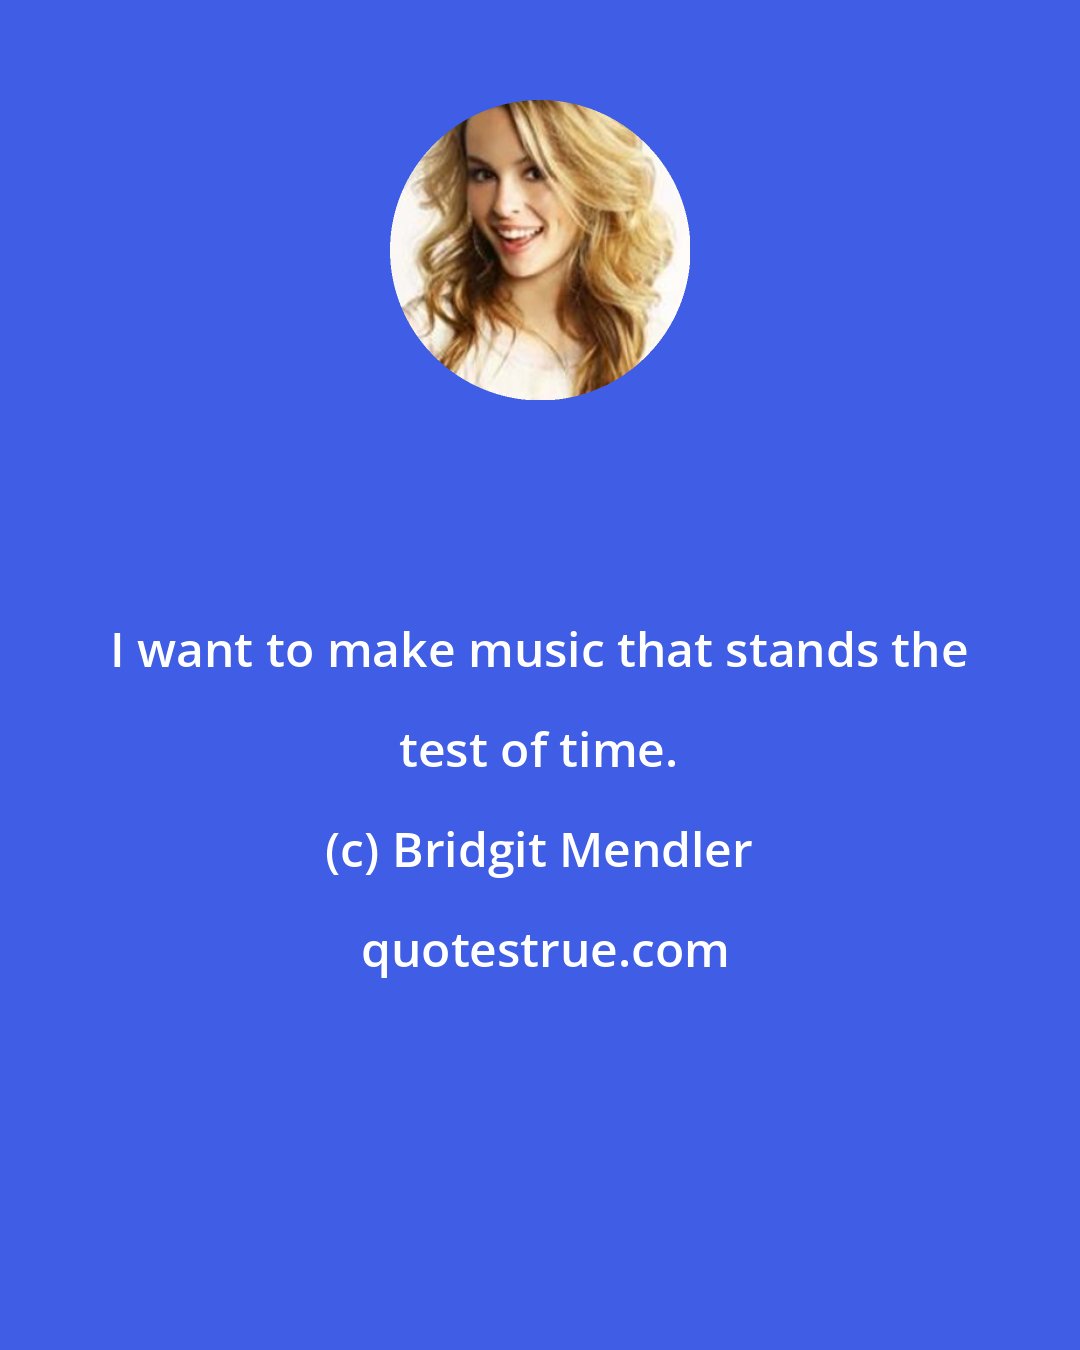 Bridgit Mendler: I want to make music that stands the test of time.